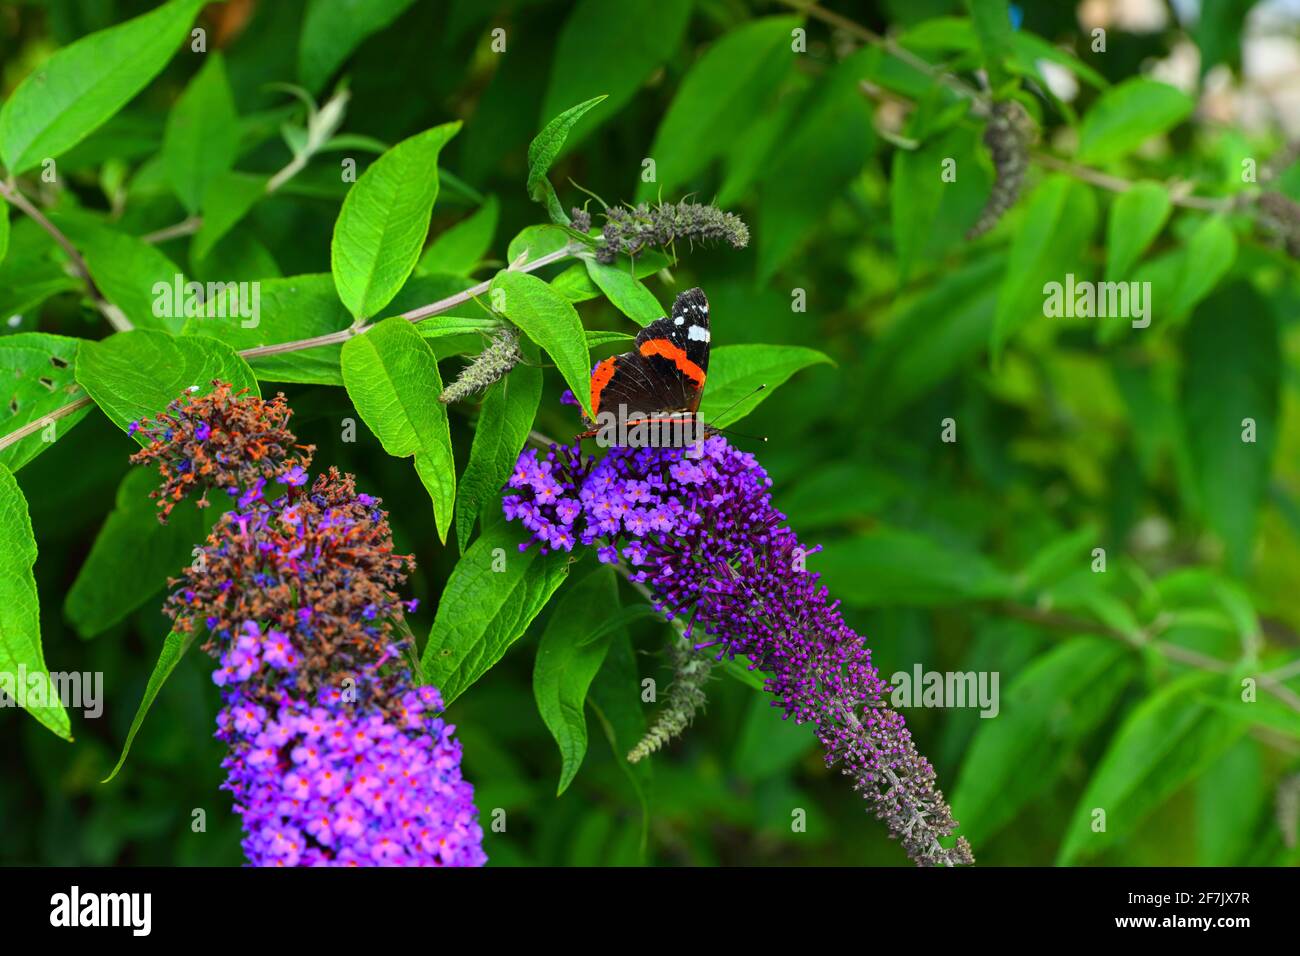 A colorful butterfly on a budleja that blooms in summer in a botanical garden Stock Photo